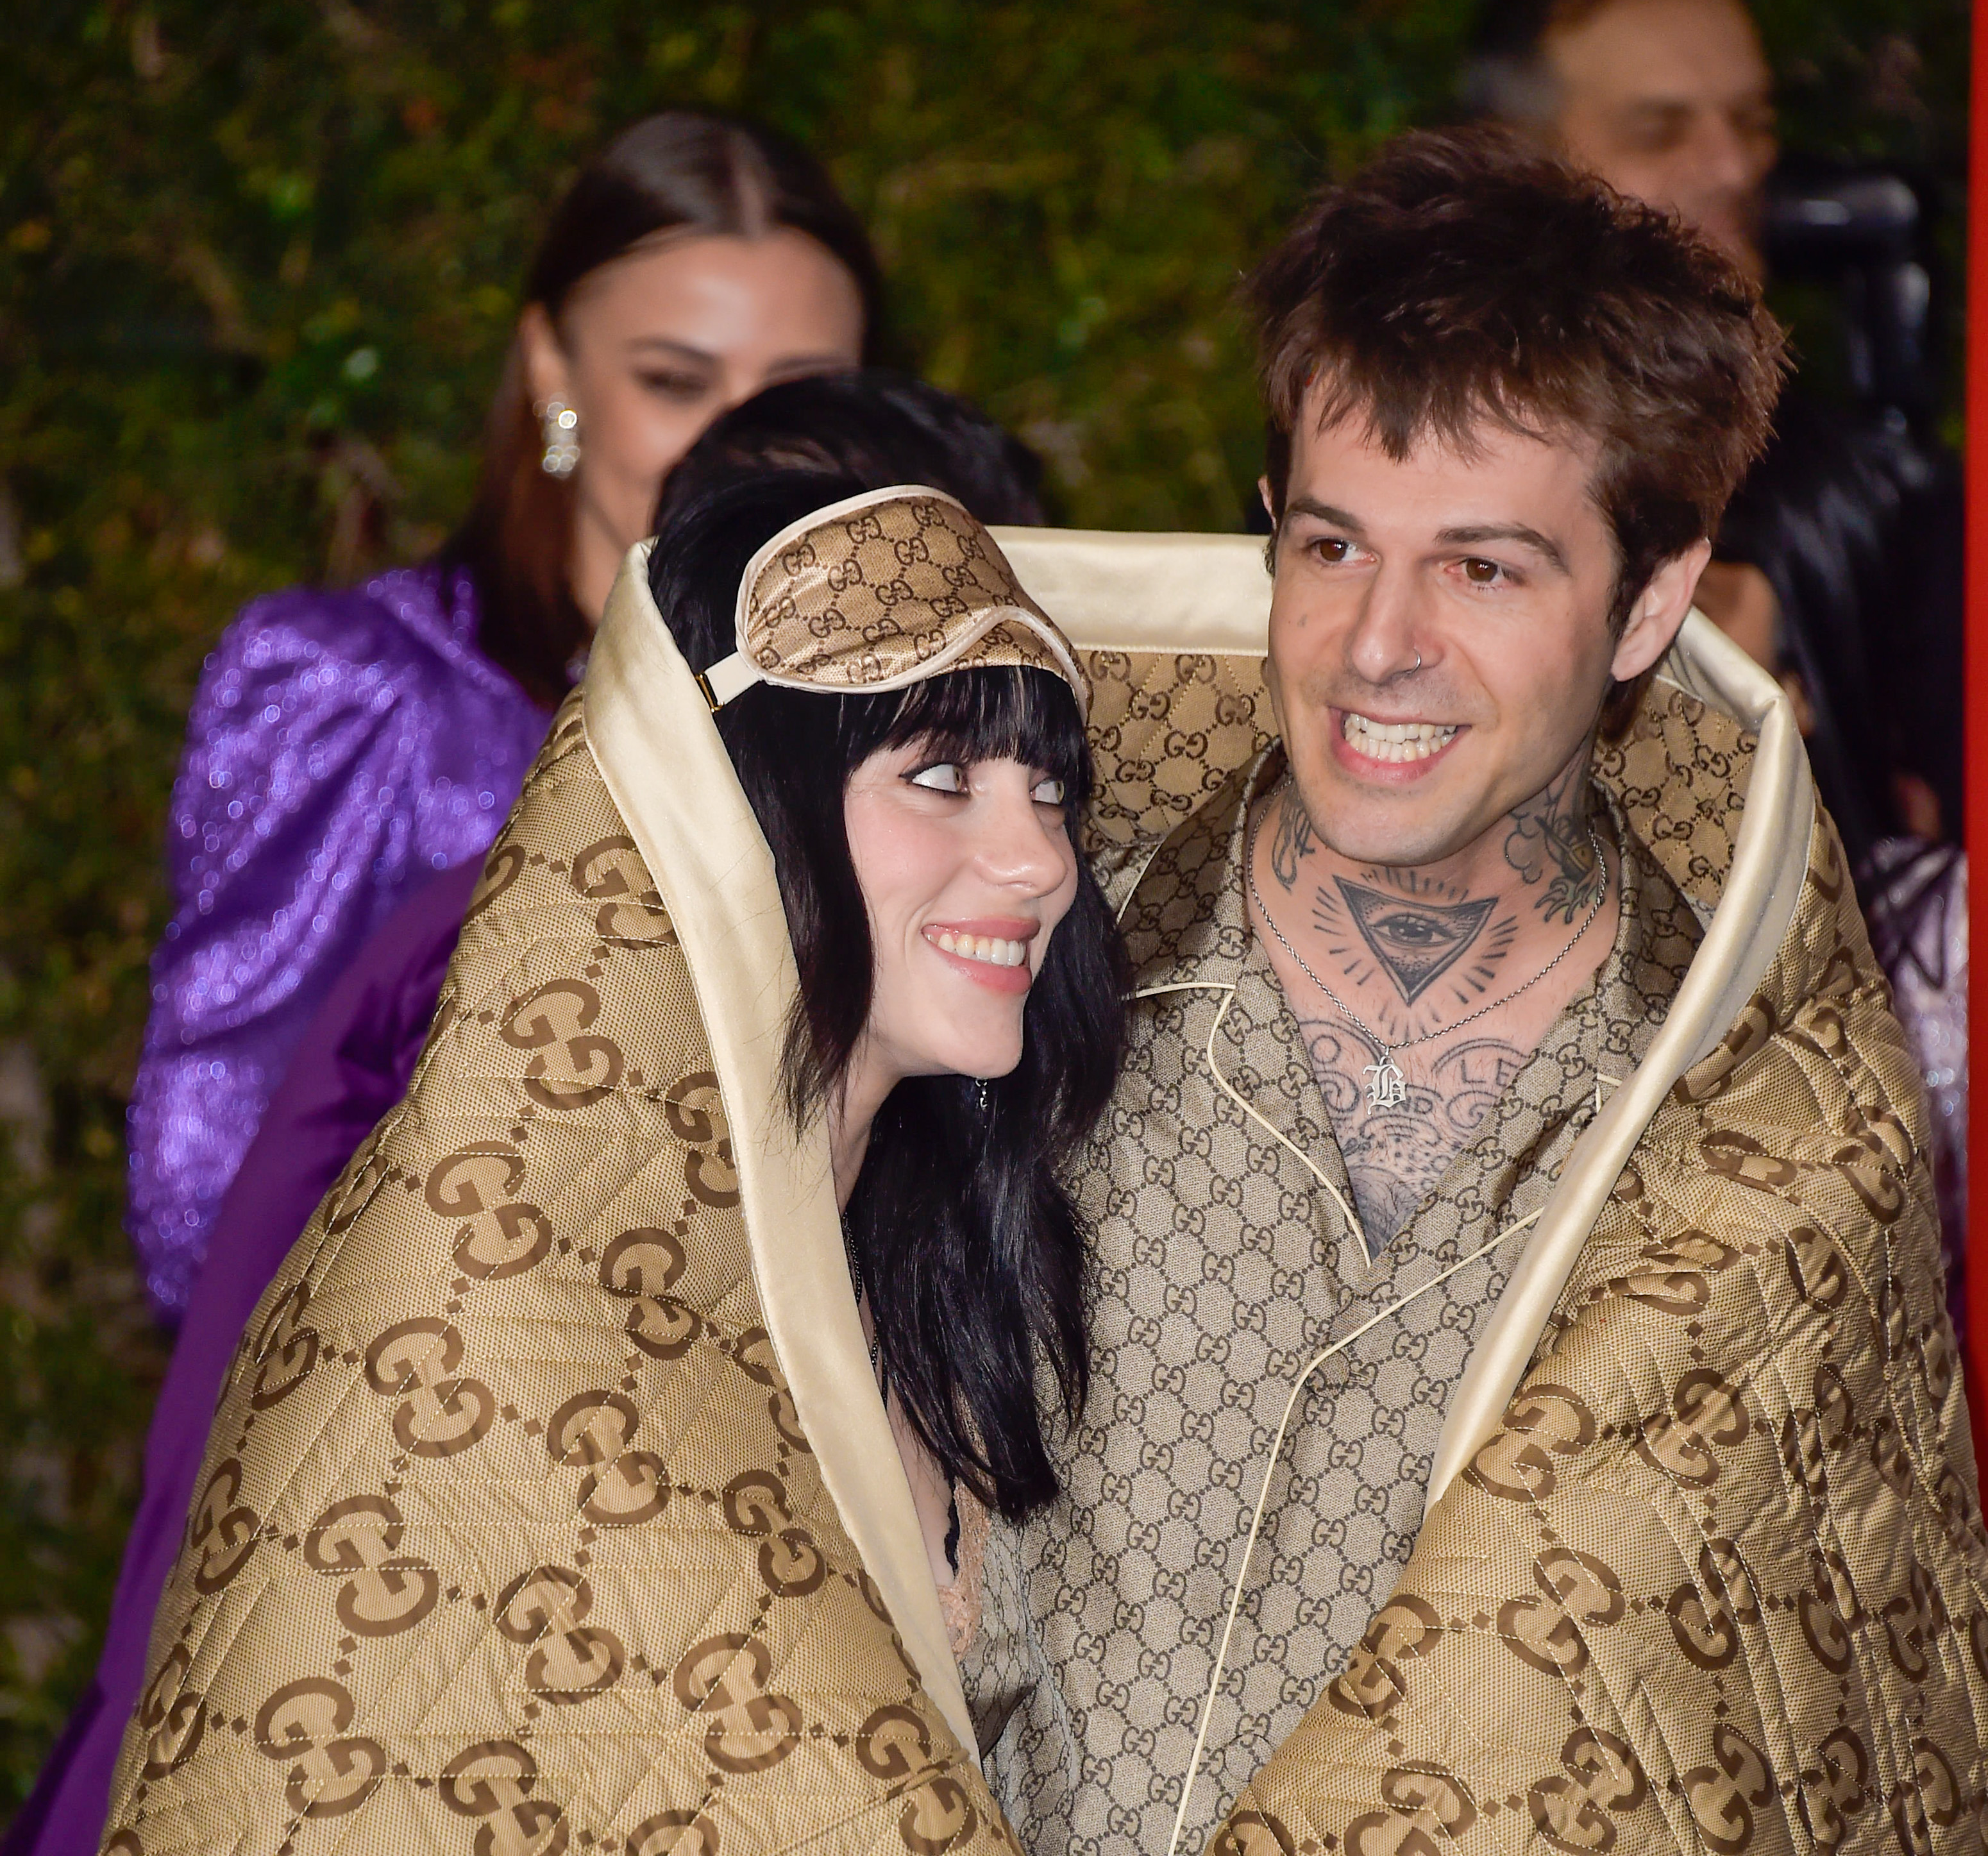 Billie Eilish and Jesse Rutherford attend the 11th Annual LACMA Art + Film Gala at Los Angeles County Museum of Art, on November 5, 2022, in Los Angeles, California. | Source: Getty Images